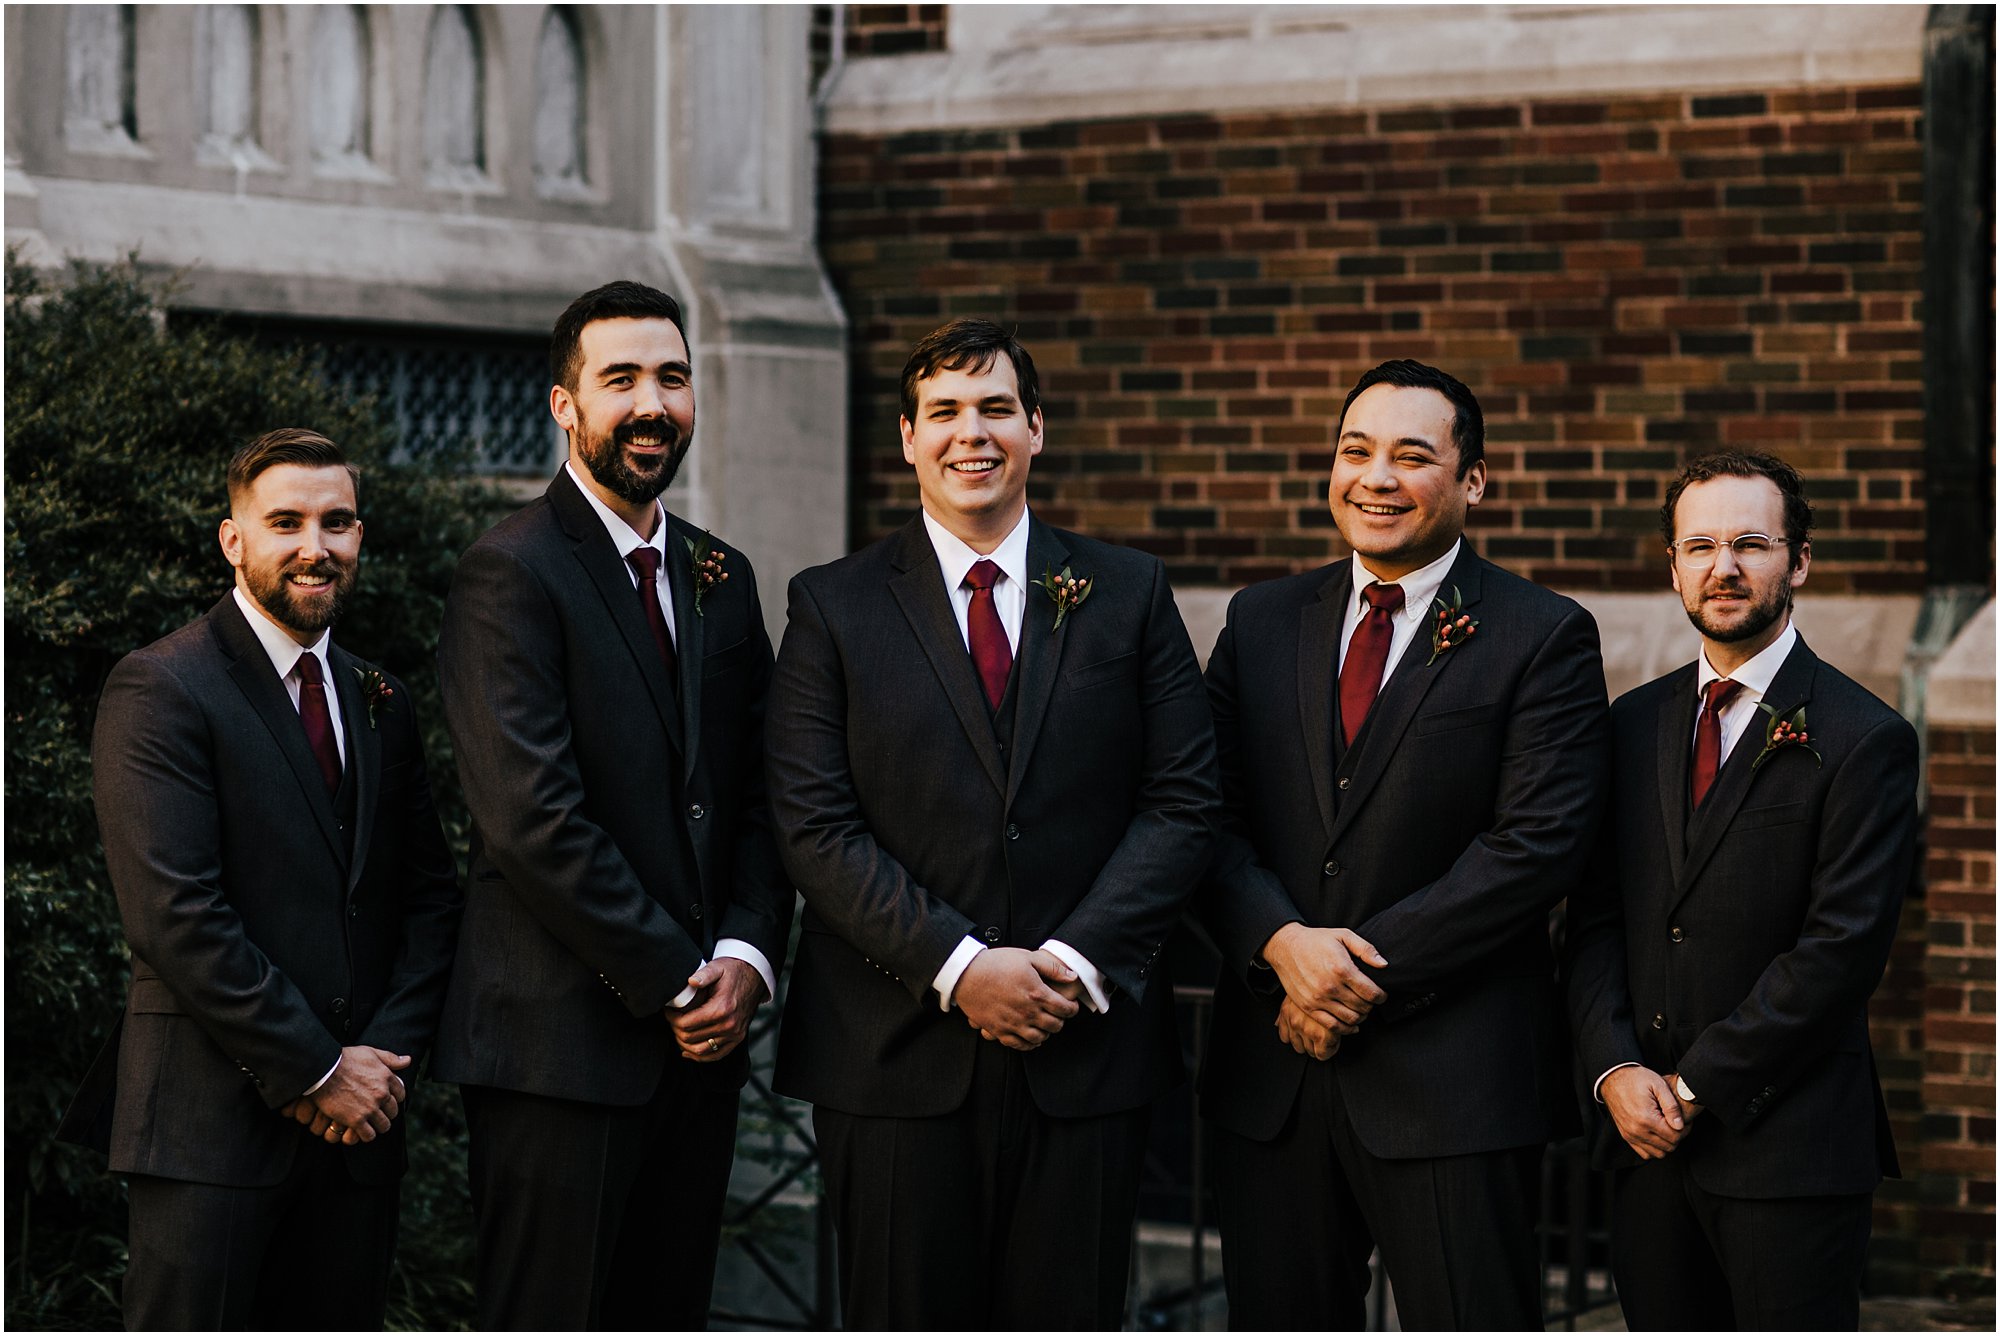 Groom and groomsmen laughing and smiling during portraits outside of historic church